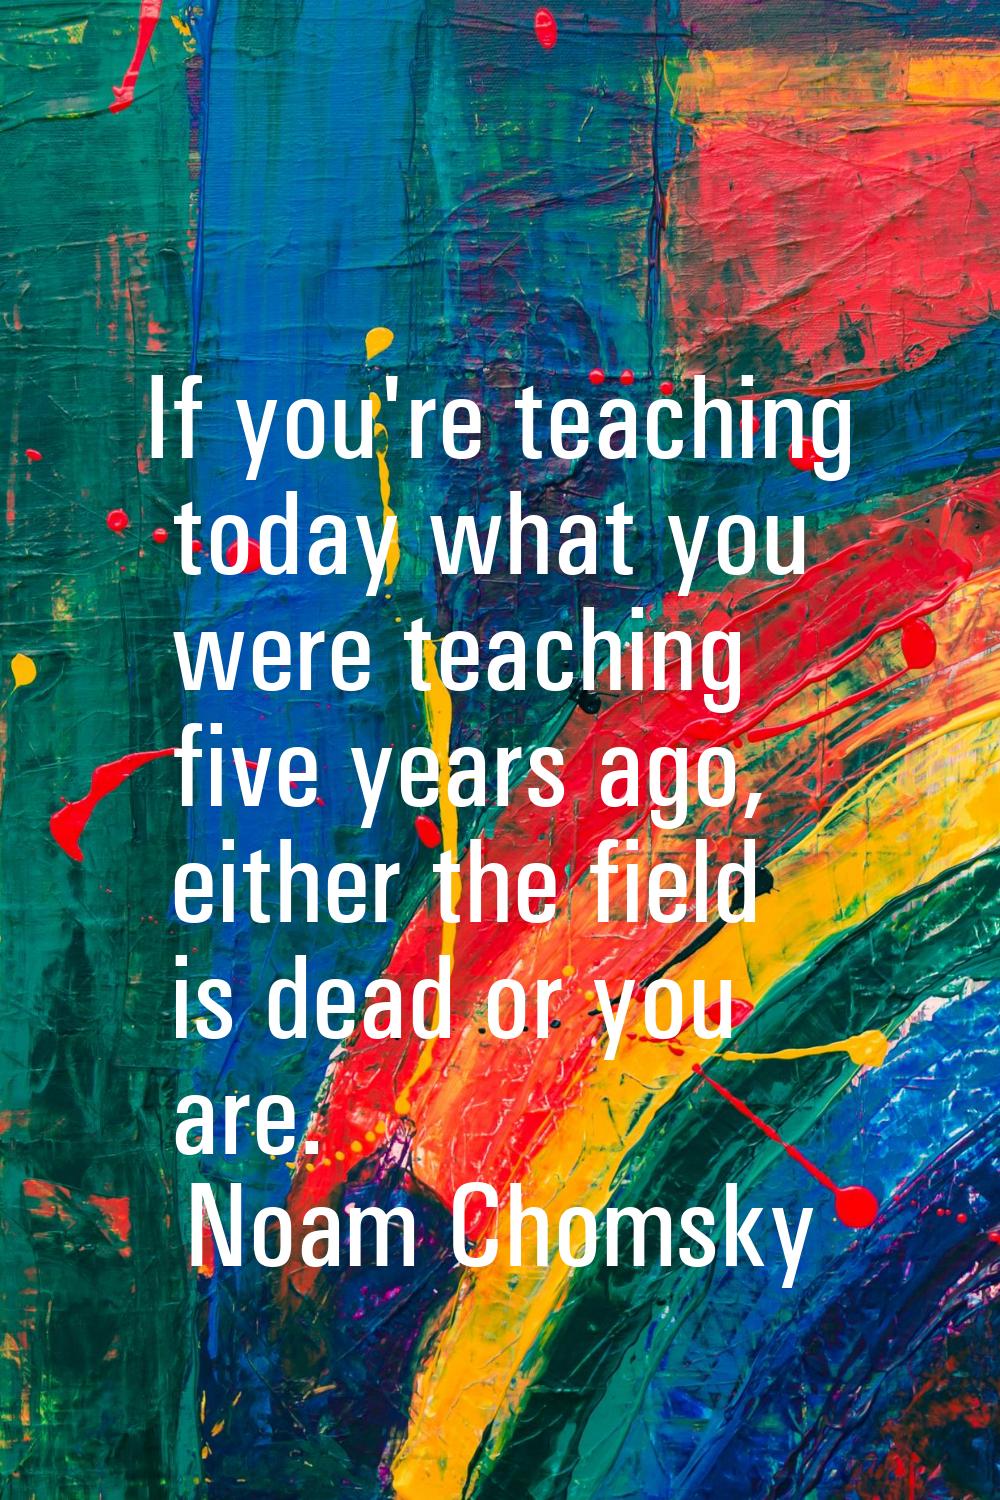 If you're teaching today what you were teaching five years ago, either the field is dead or you are